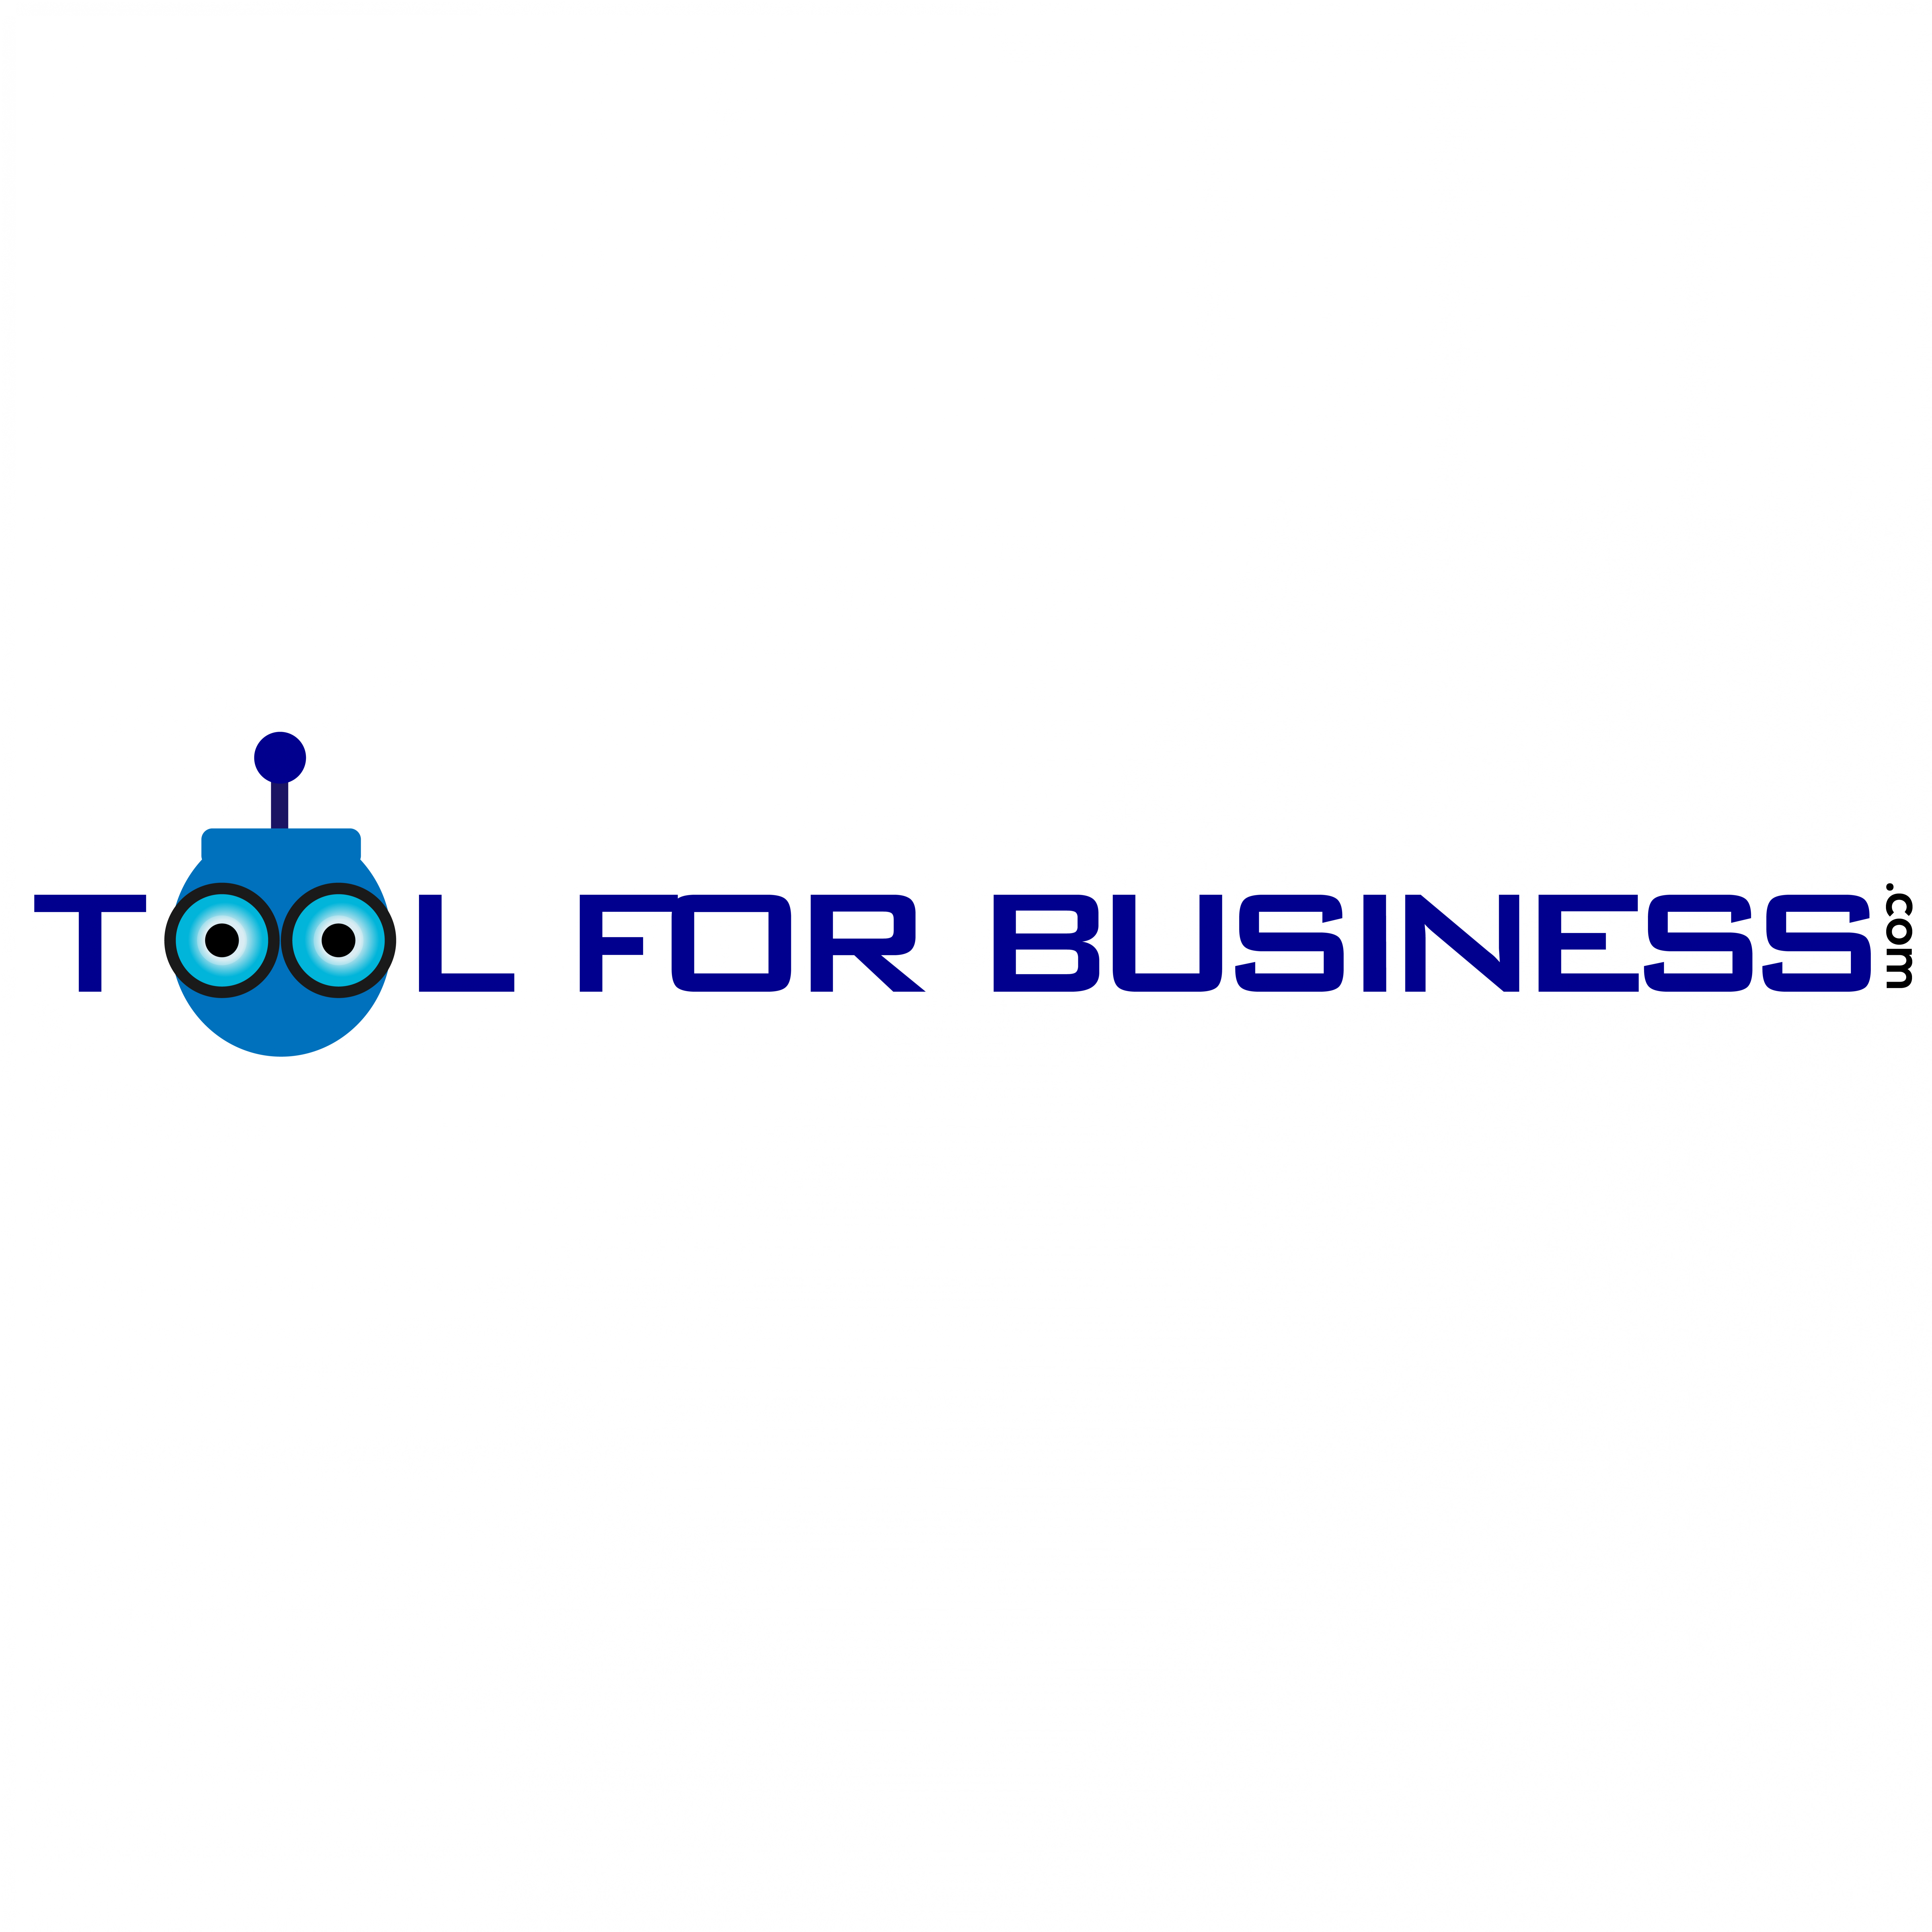 TOOLFORBUSINESS